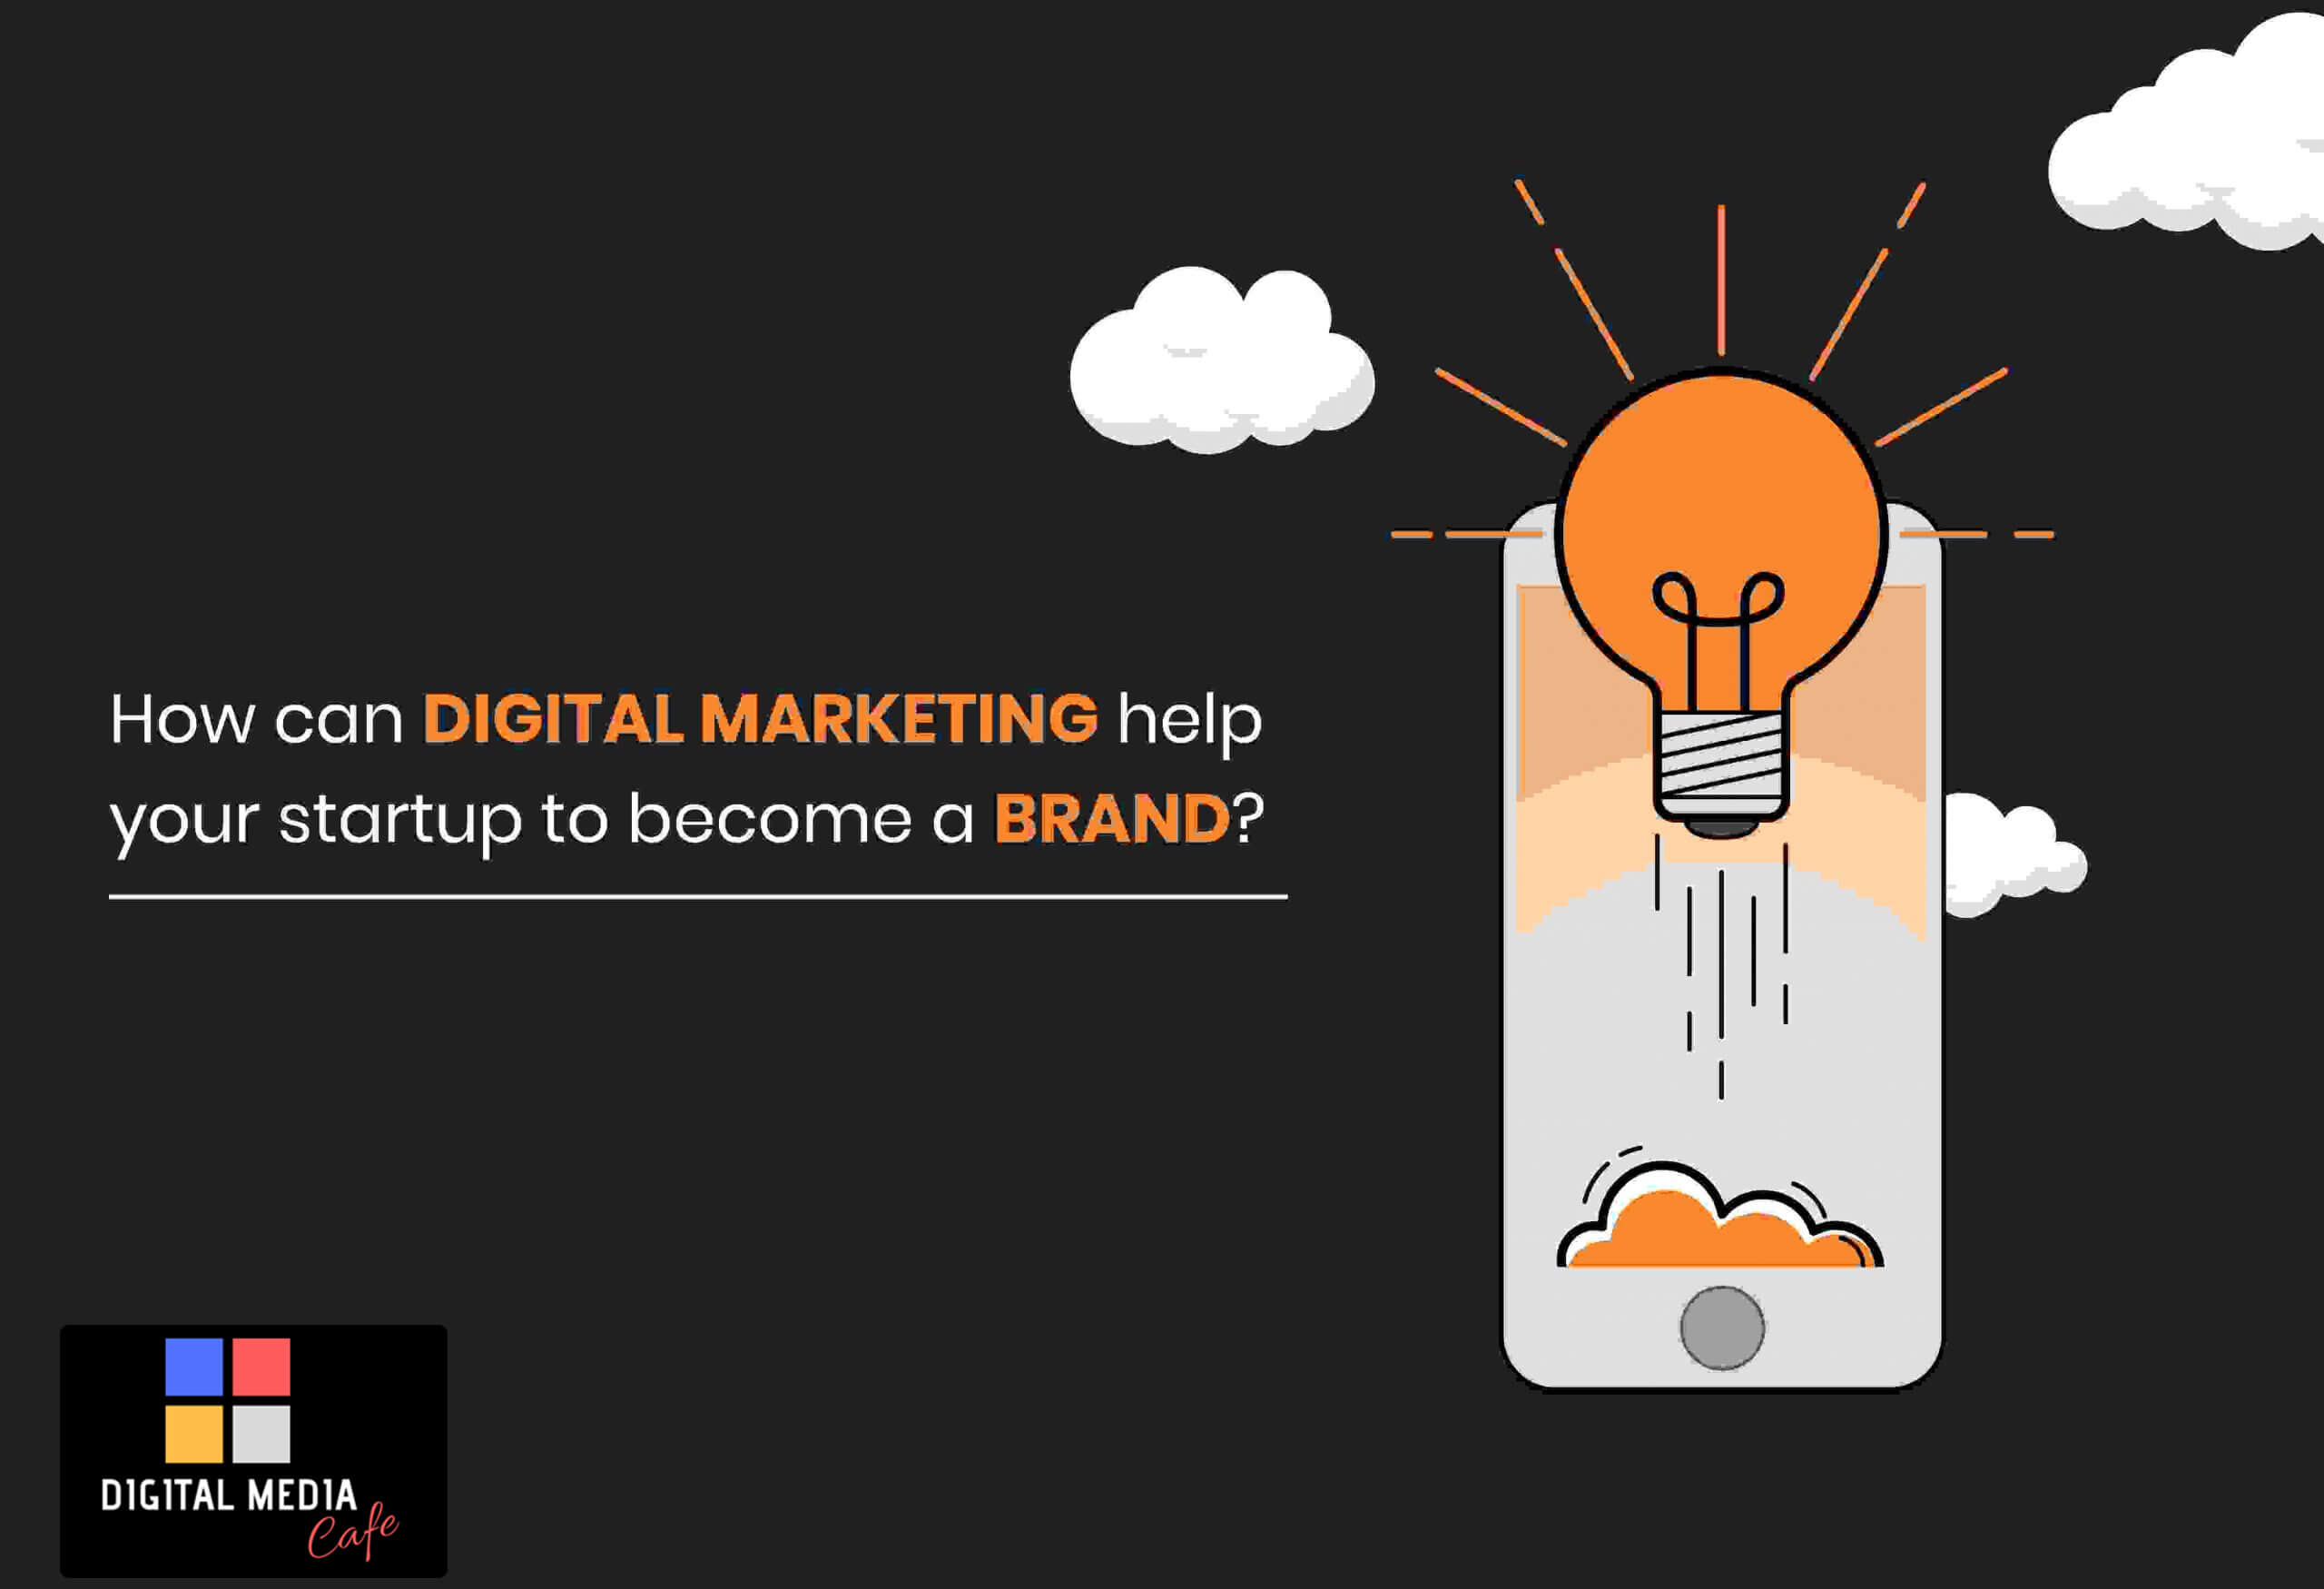 How can Digital Marketing Help Your Startup to become a Brand? - AJSWebTech